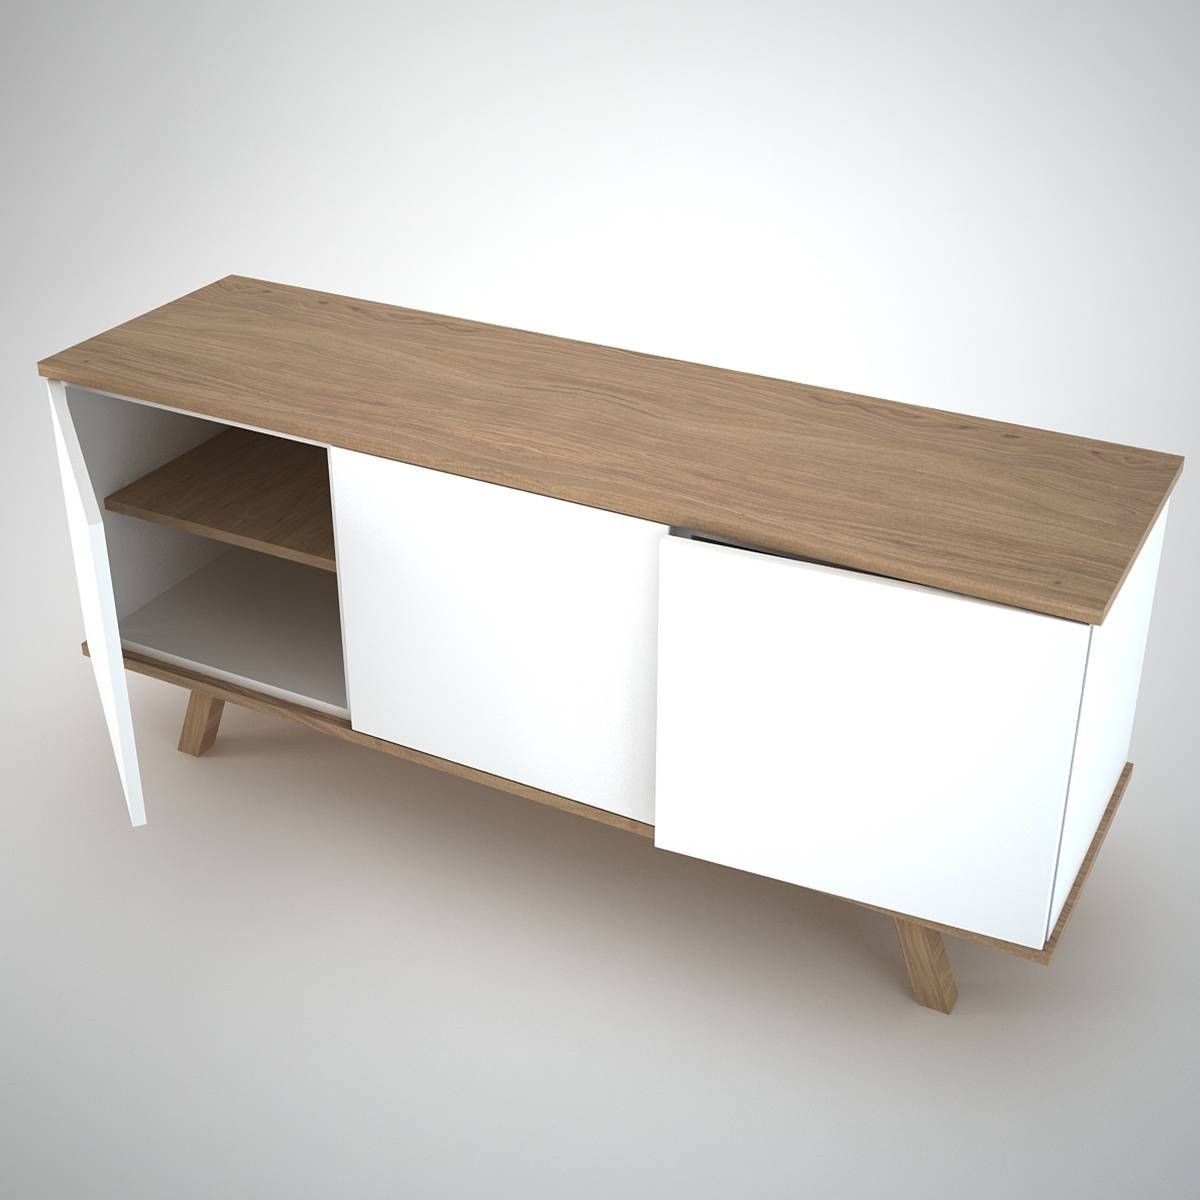 Modern Sideboards, Furniture: Minimalist Modern Sideboards With Intended For Contemporary White Sideboards (View 10 of 15)